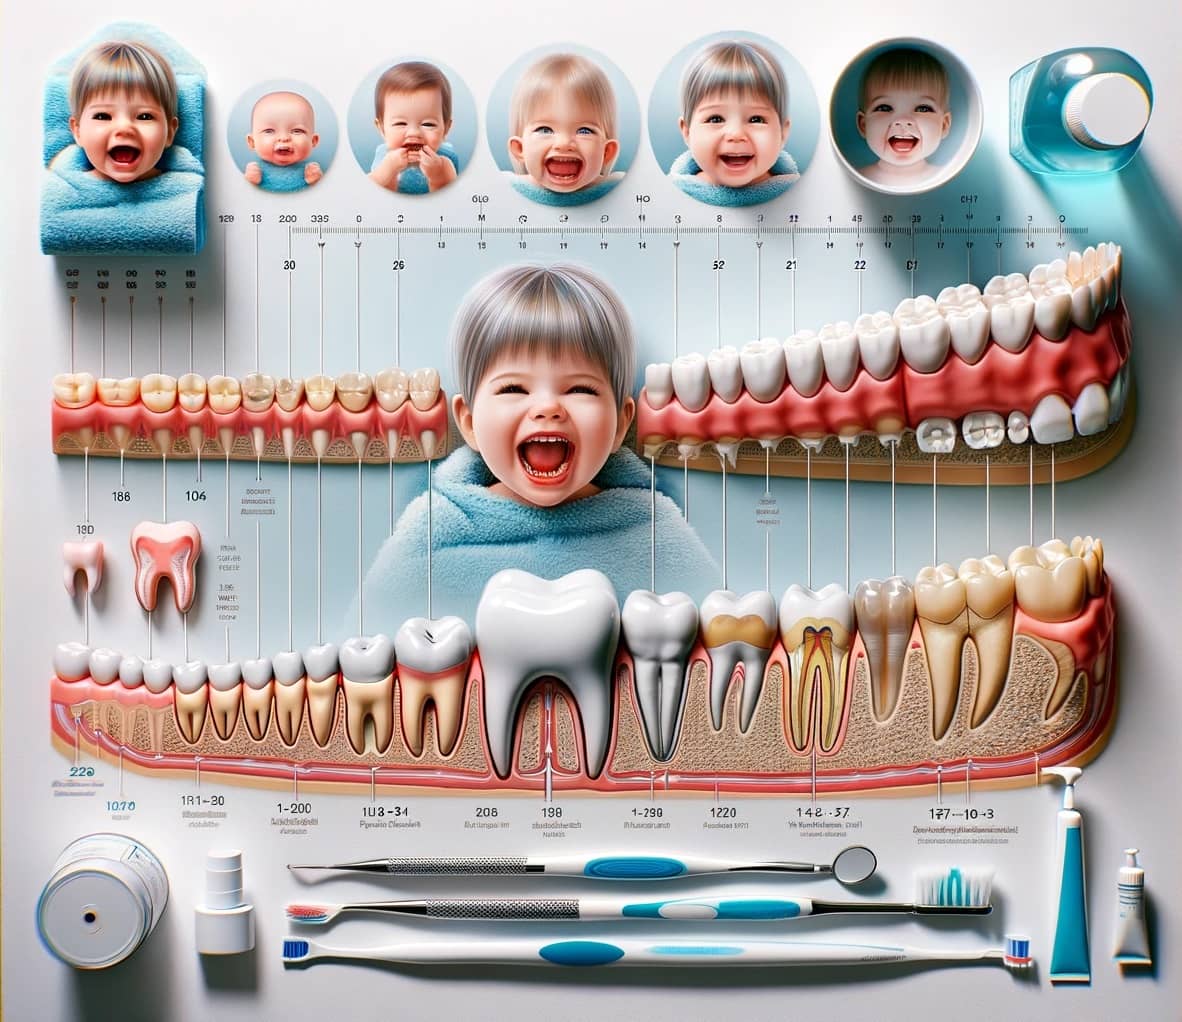 engaging, informative timeline of the emergence and progression of baby teeth into permanent teeth